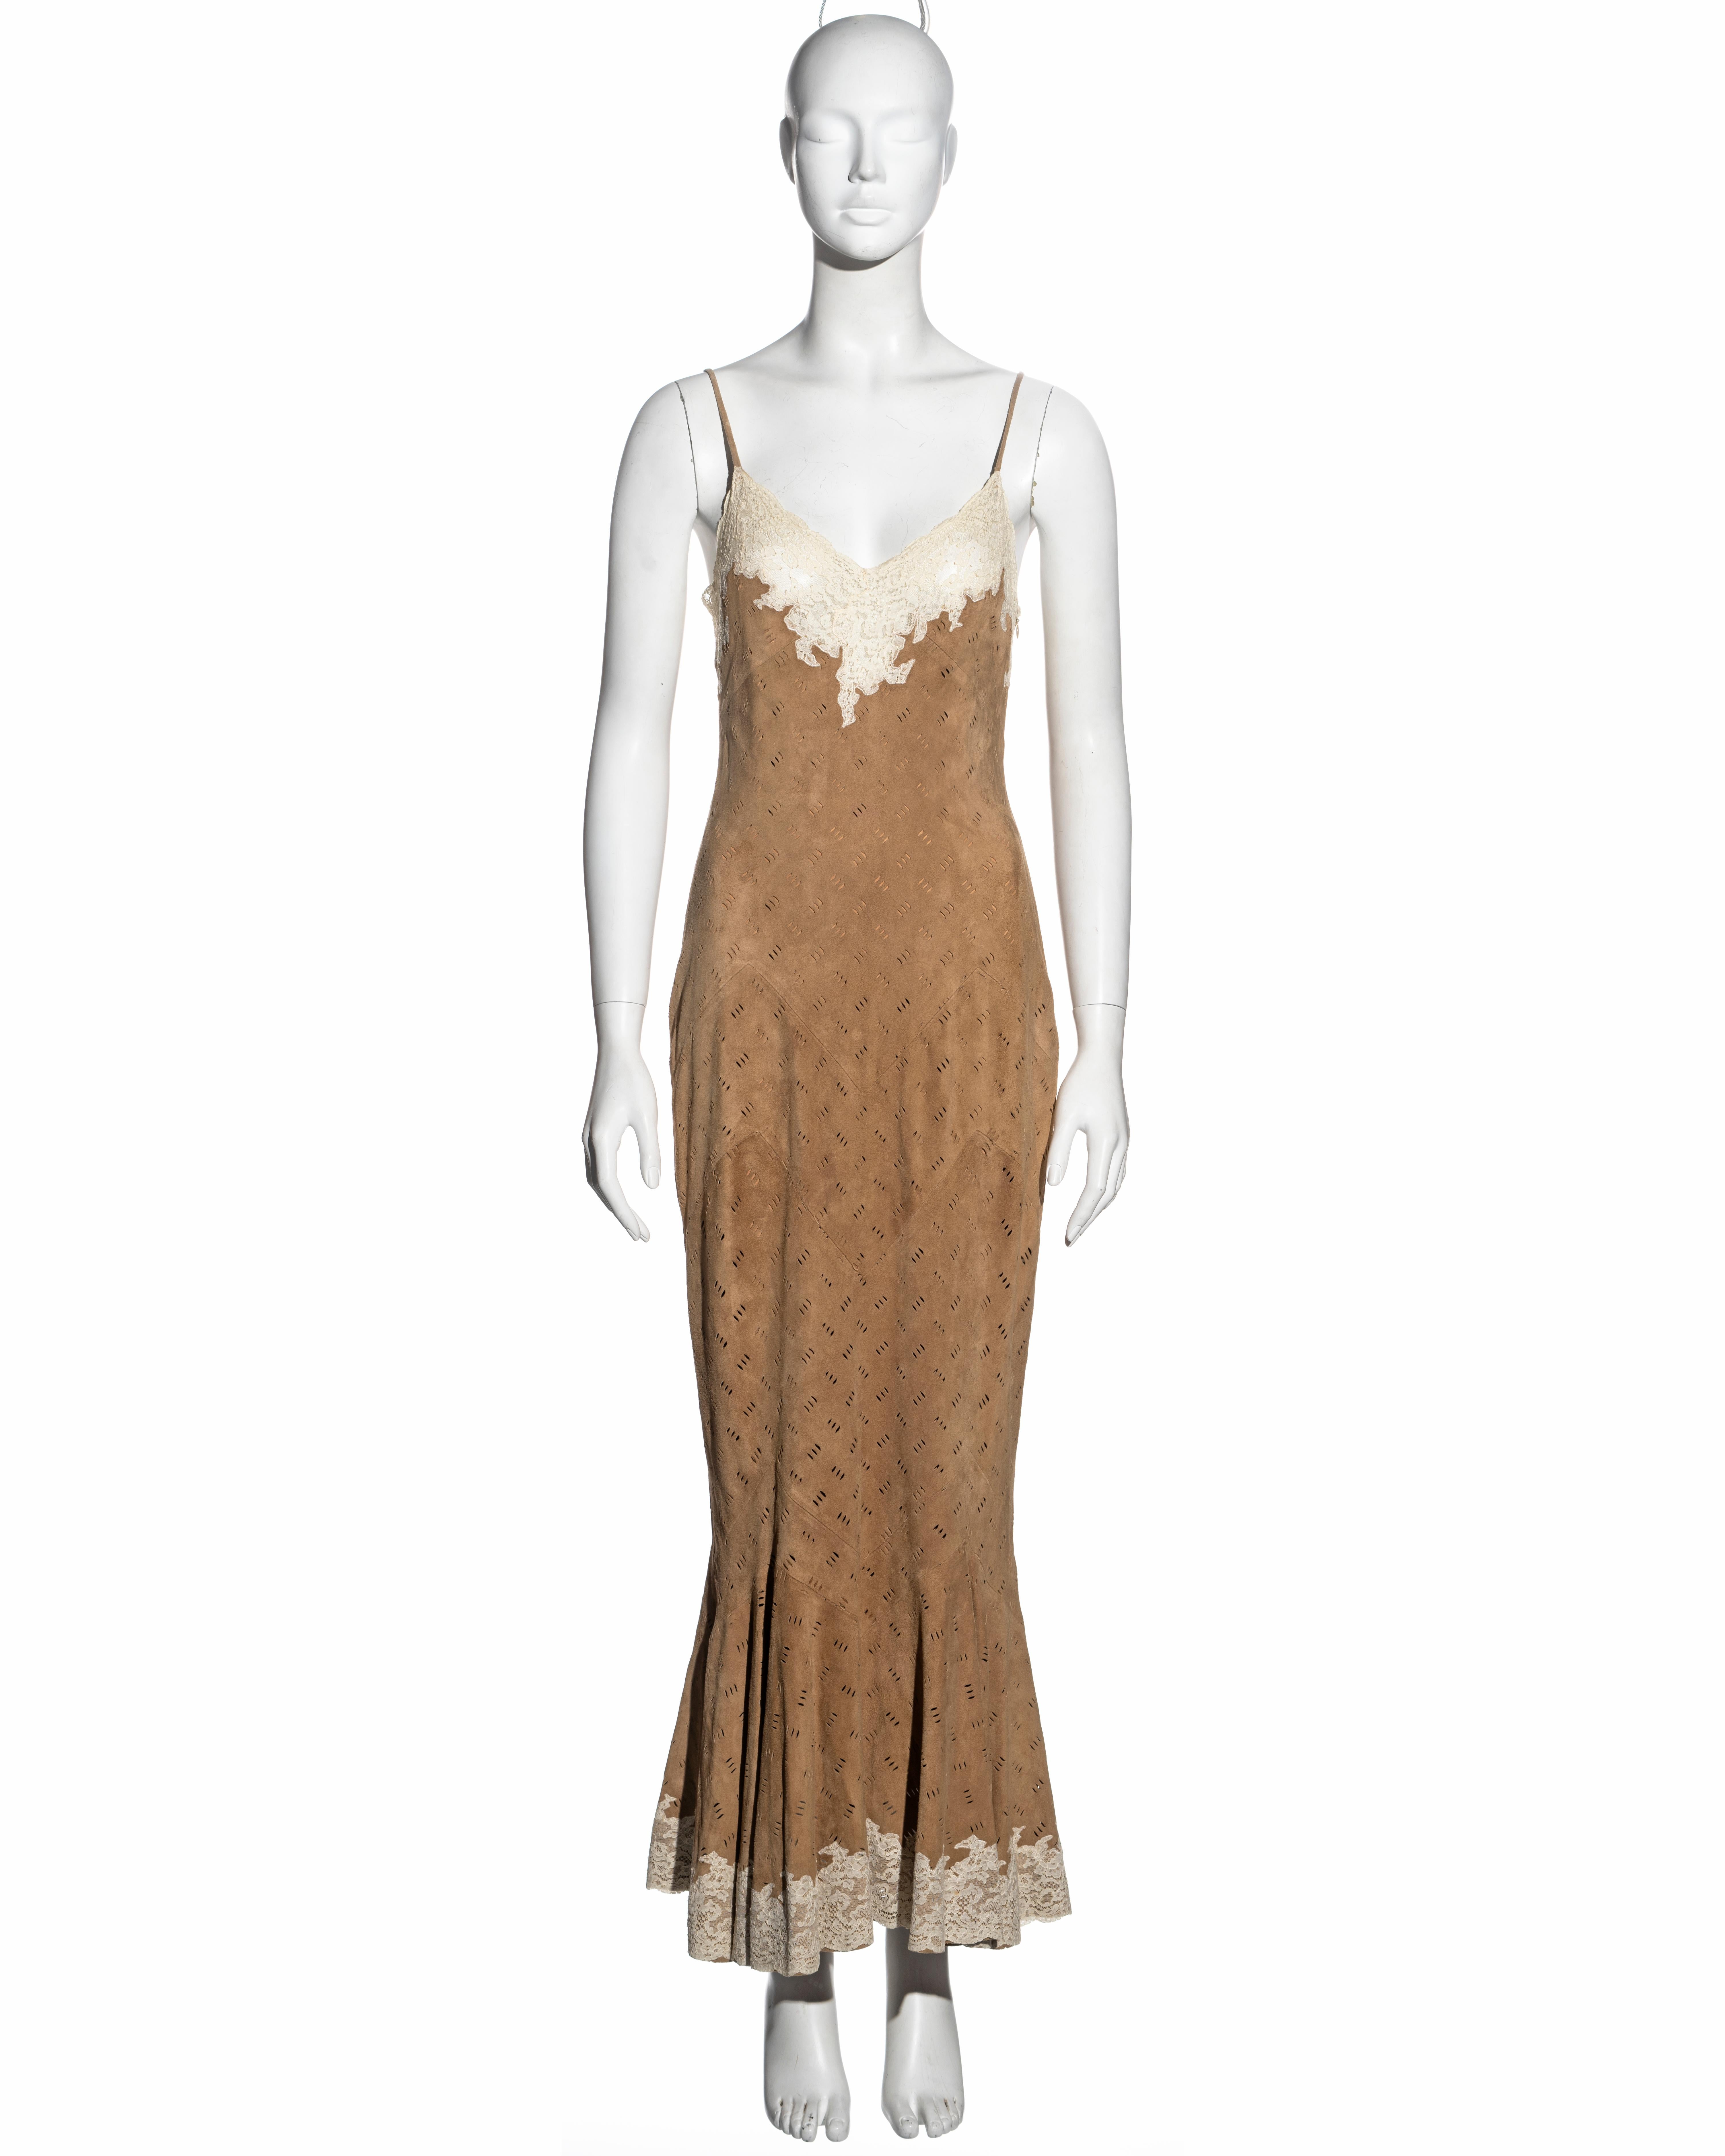 ▪ Brand: Christian Dior 
▪ Creative Director: John Galliano 
▪ Collection: Fall-Winter 1999 
▪ Sold by: One of a Kind Archive 
▪ Fabric: Laser-Cut Suede, Lace, Silk 
▪ Details: Cream lace trim 
▪ Size: FR 40 - UK12 - US8 
▪ Made in: France 
▪